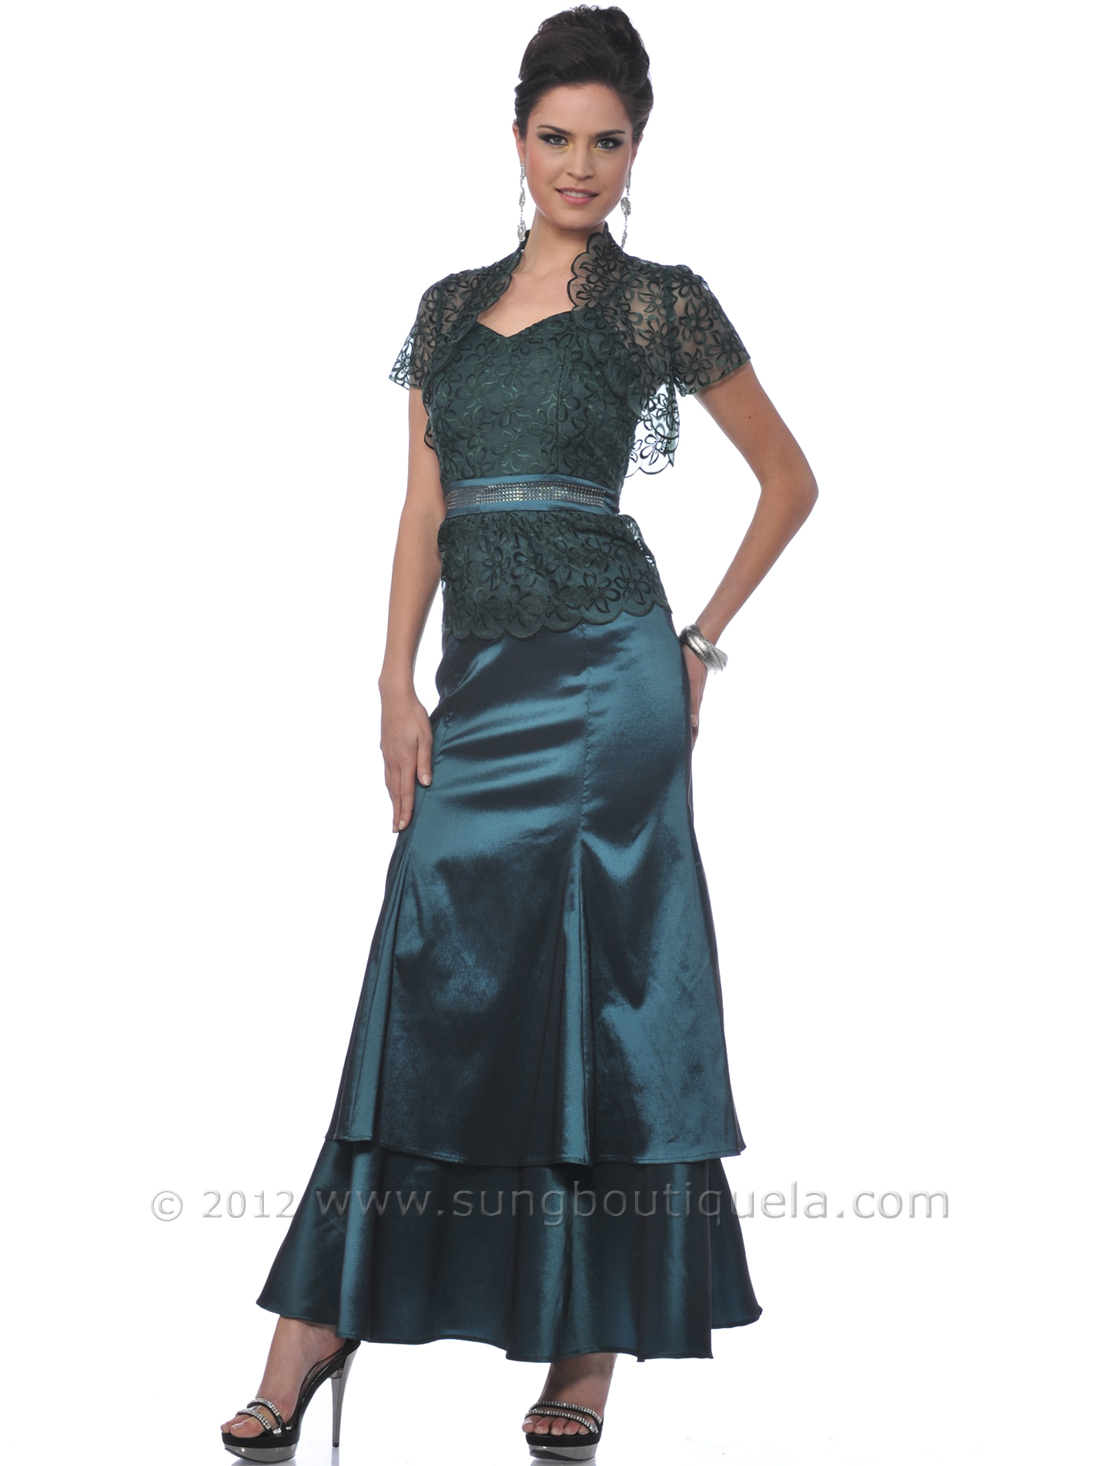 TEAL DRESSES AT SHOPSTYLE - SHOPSTYLE FOR FASHION AND DESIGNERS